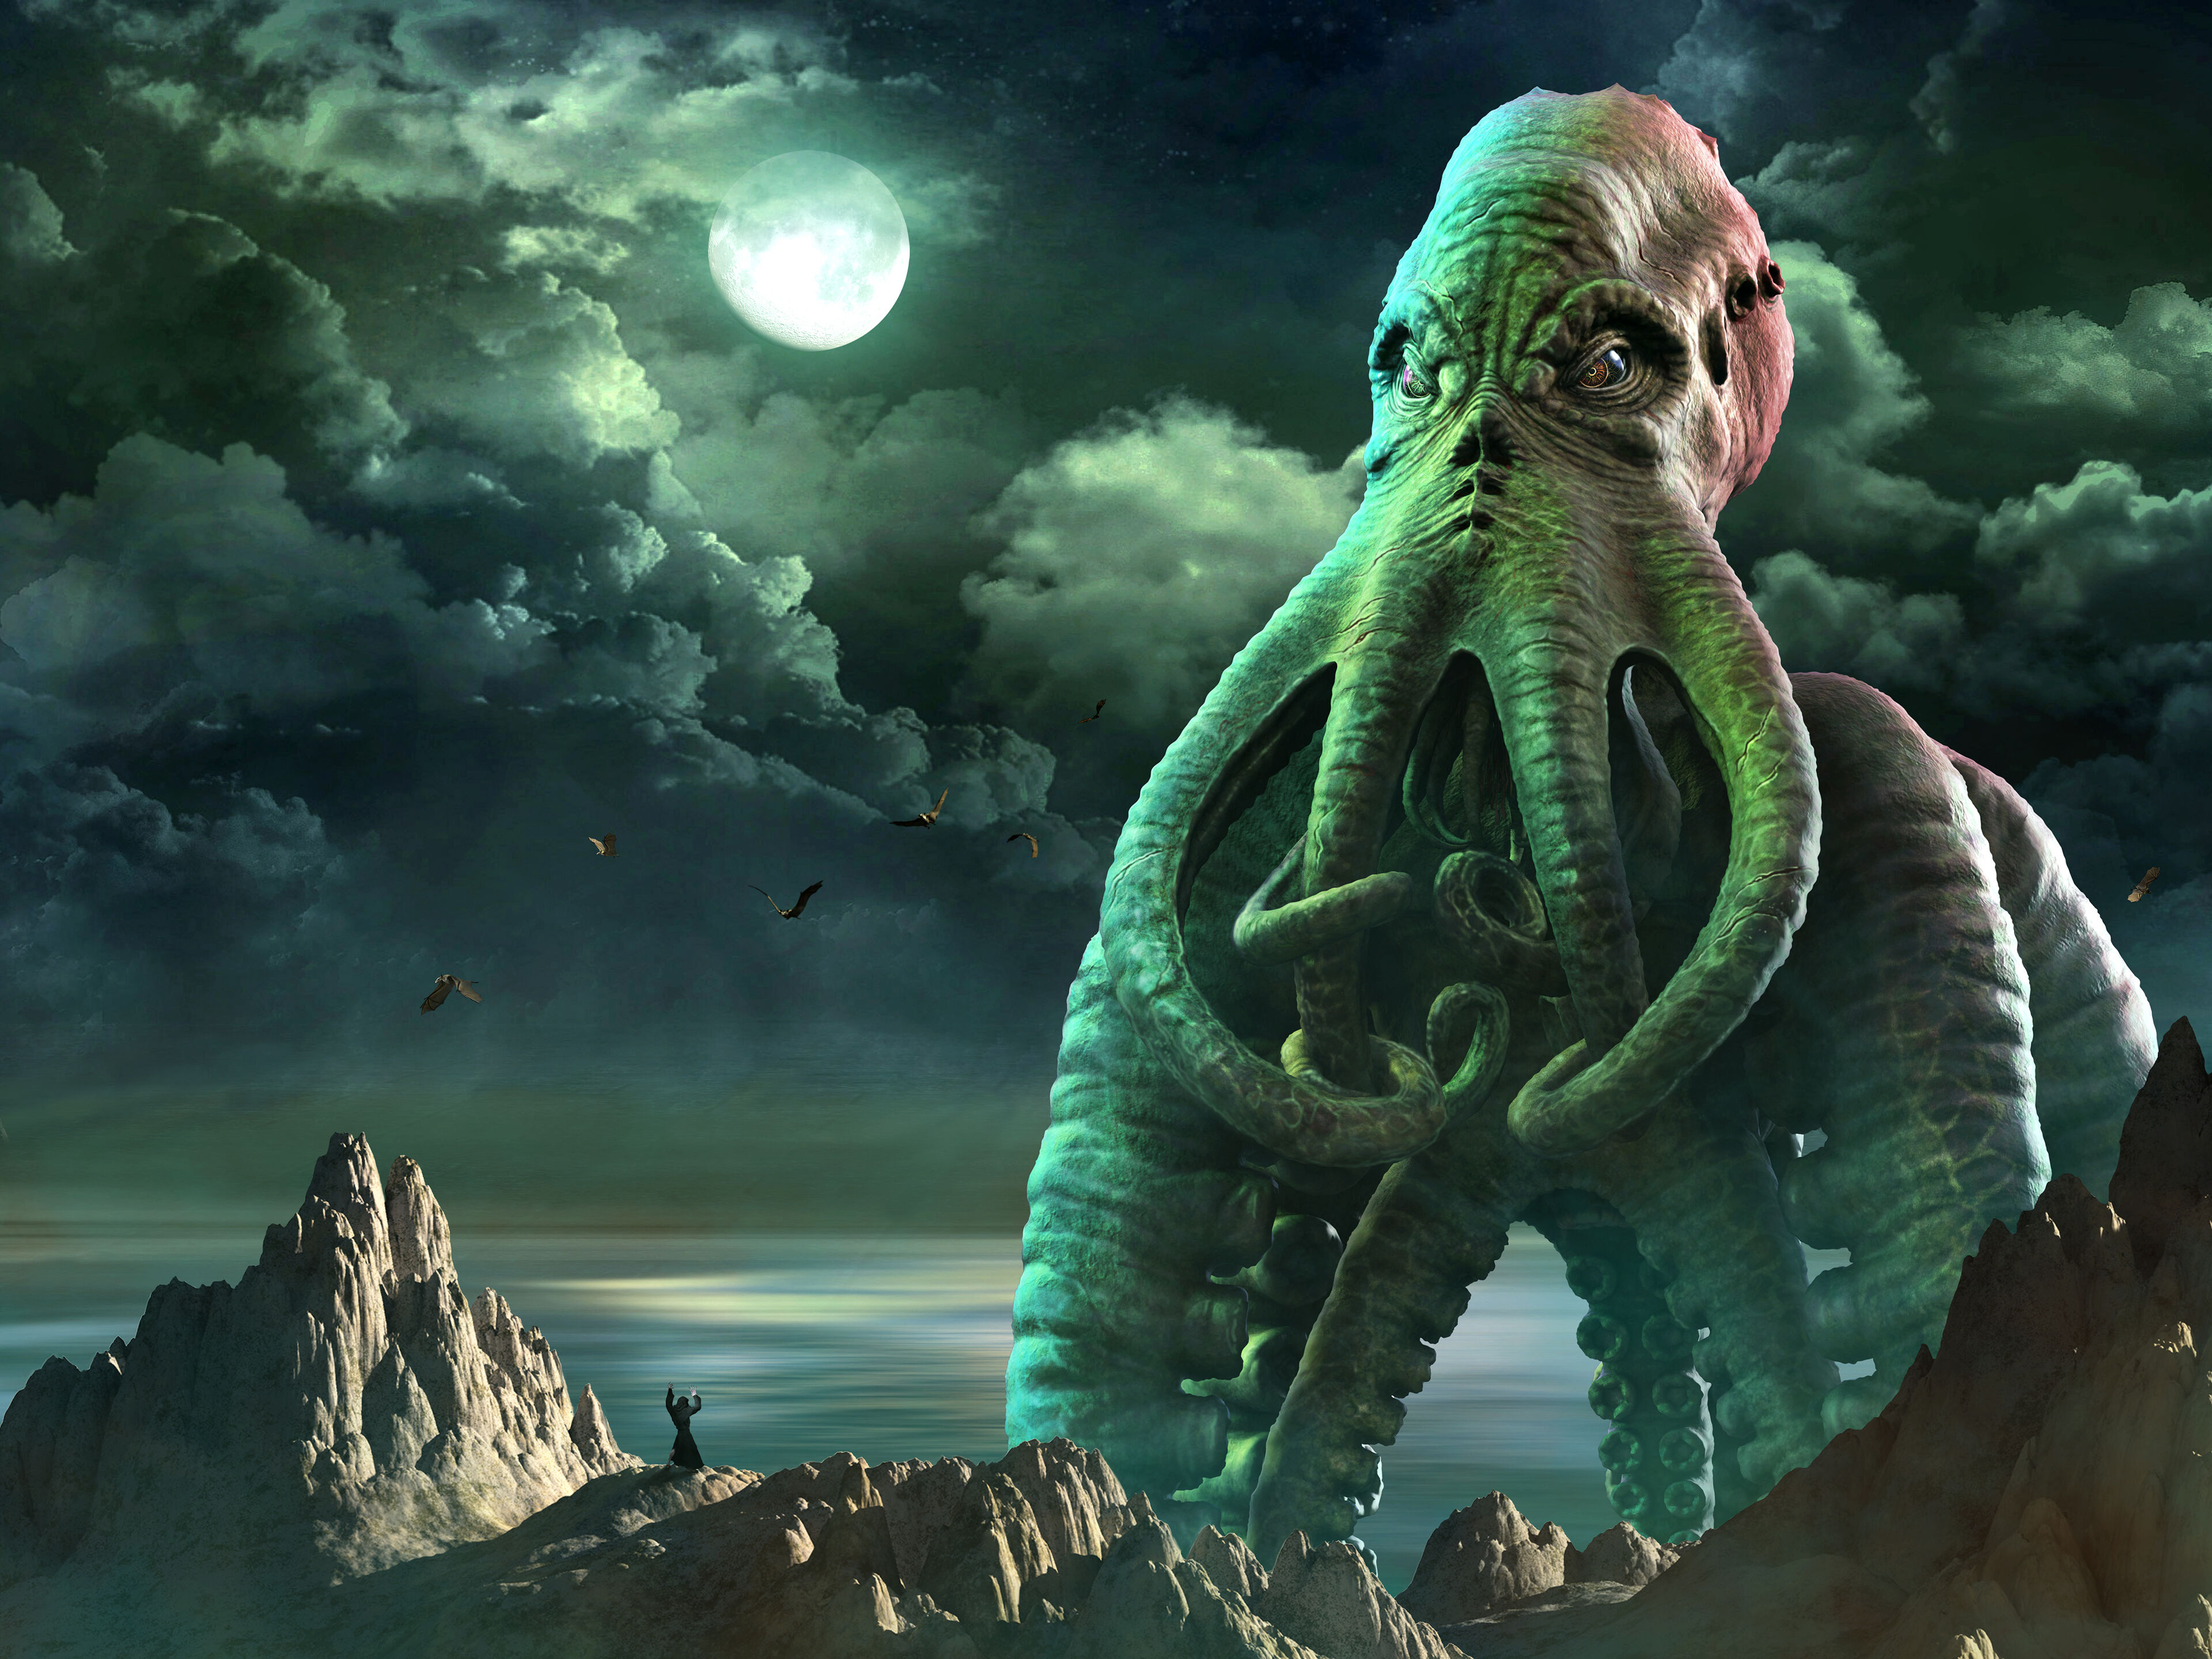 A colossal cephalopod creature stands under a full moon amidst mountainous terrain, its skin reflecting the moonlight, with birds flying in the distance.